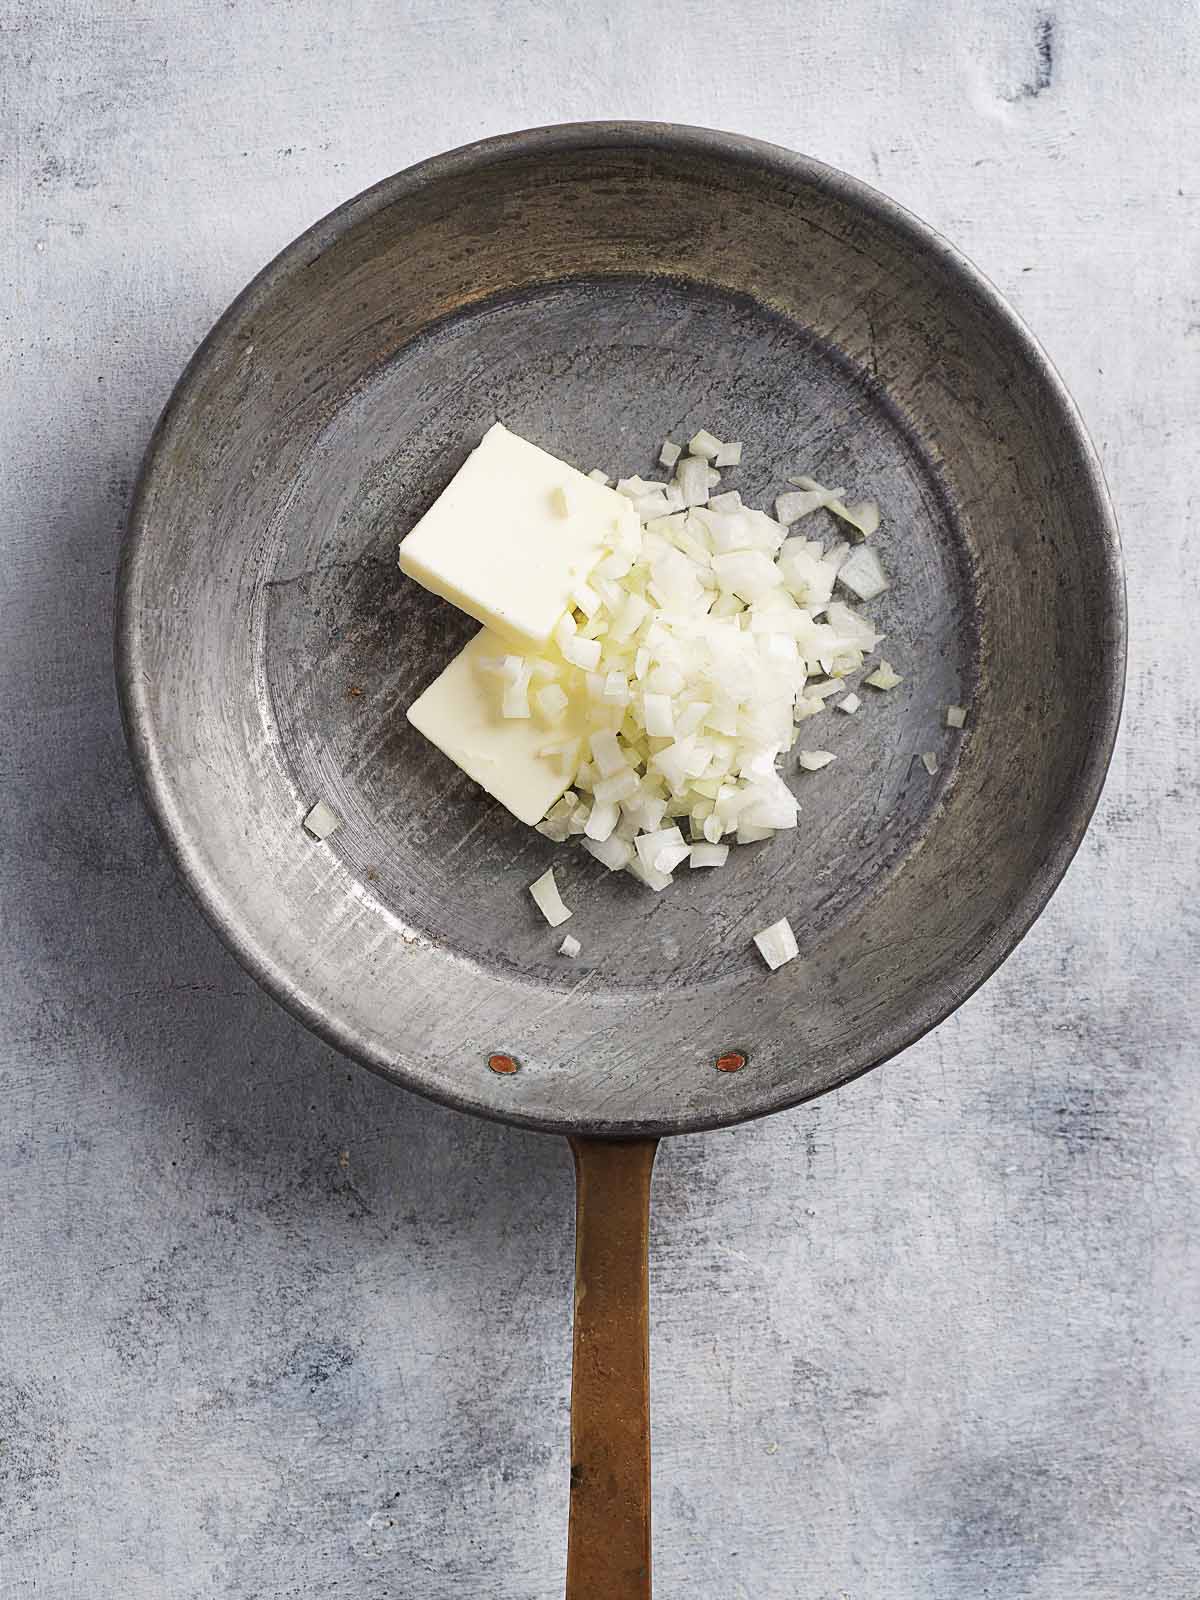 A skillet with butter and chopped white onions.